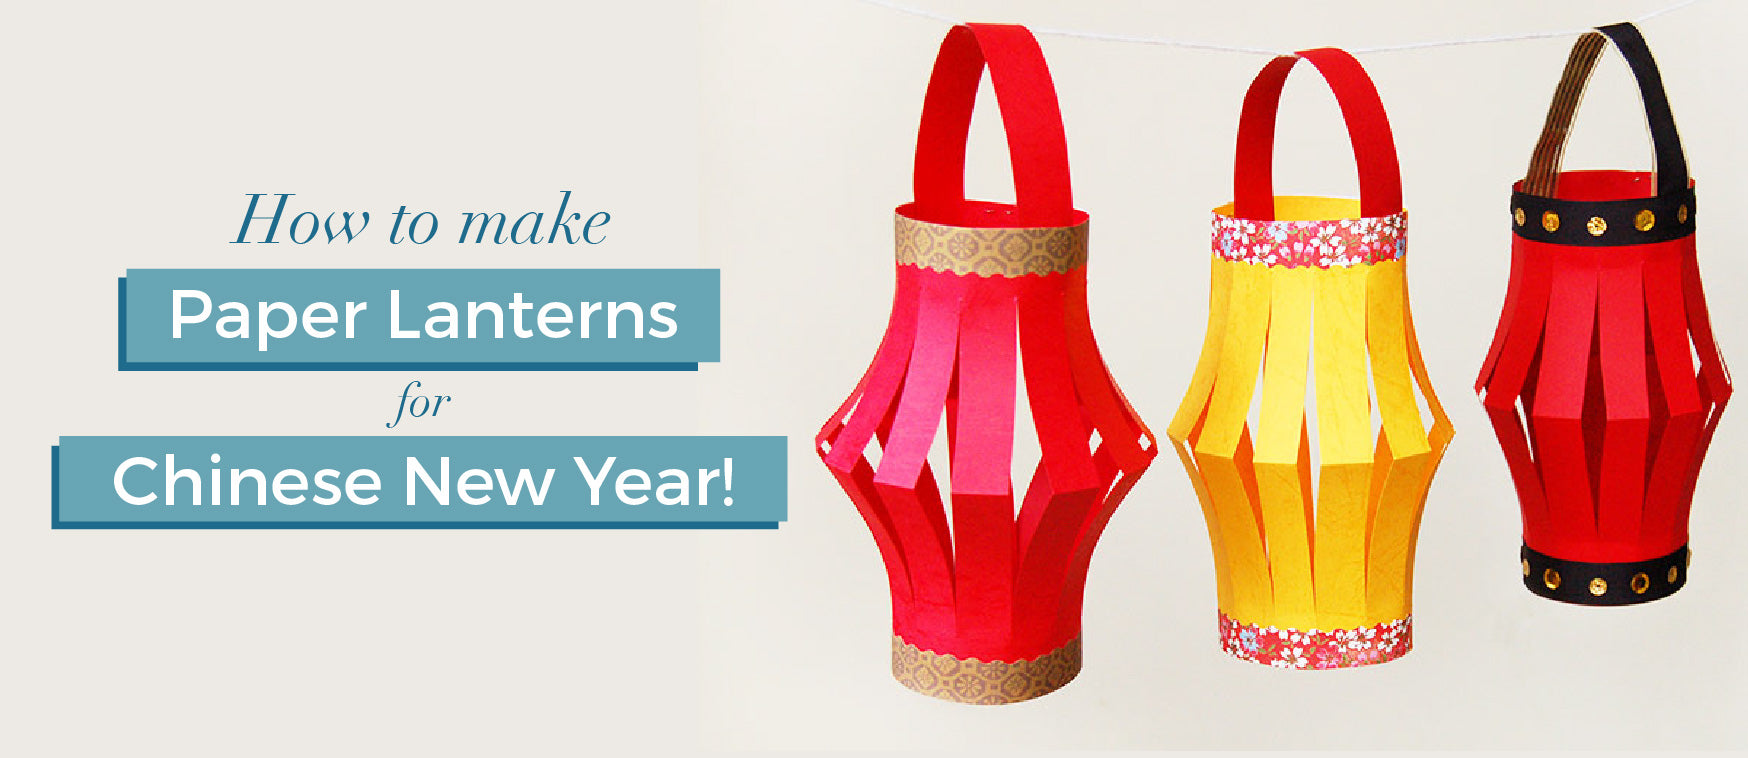 How to make Paper Lanterns for Chinese New Year!